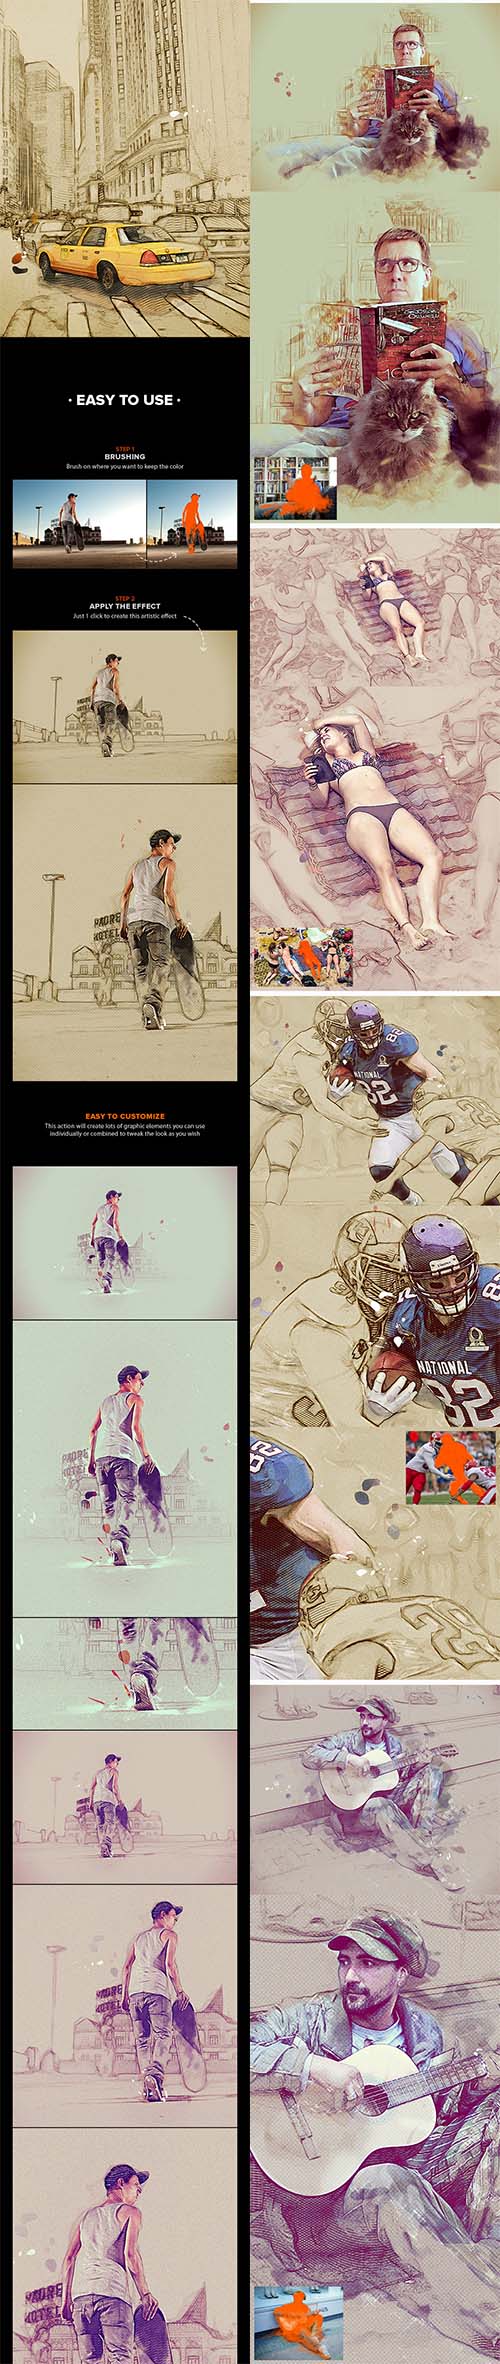 GraphicRiver - MixArt - Sketch Painting Photoshop Action 10854667